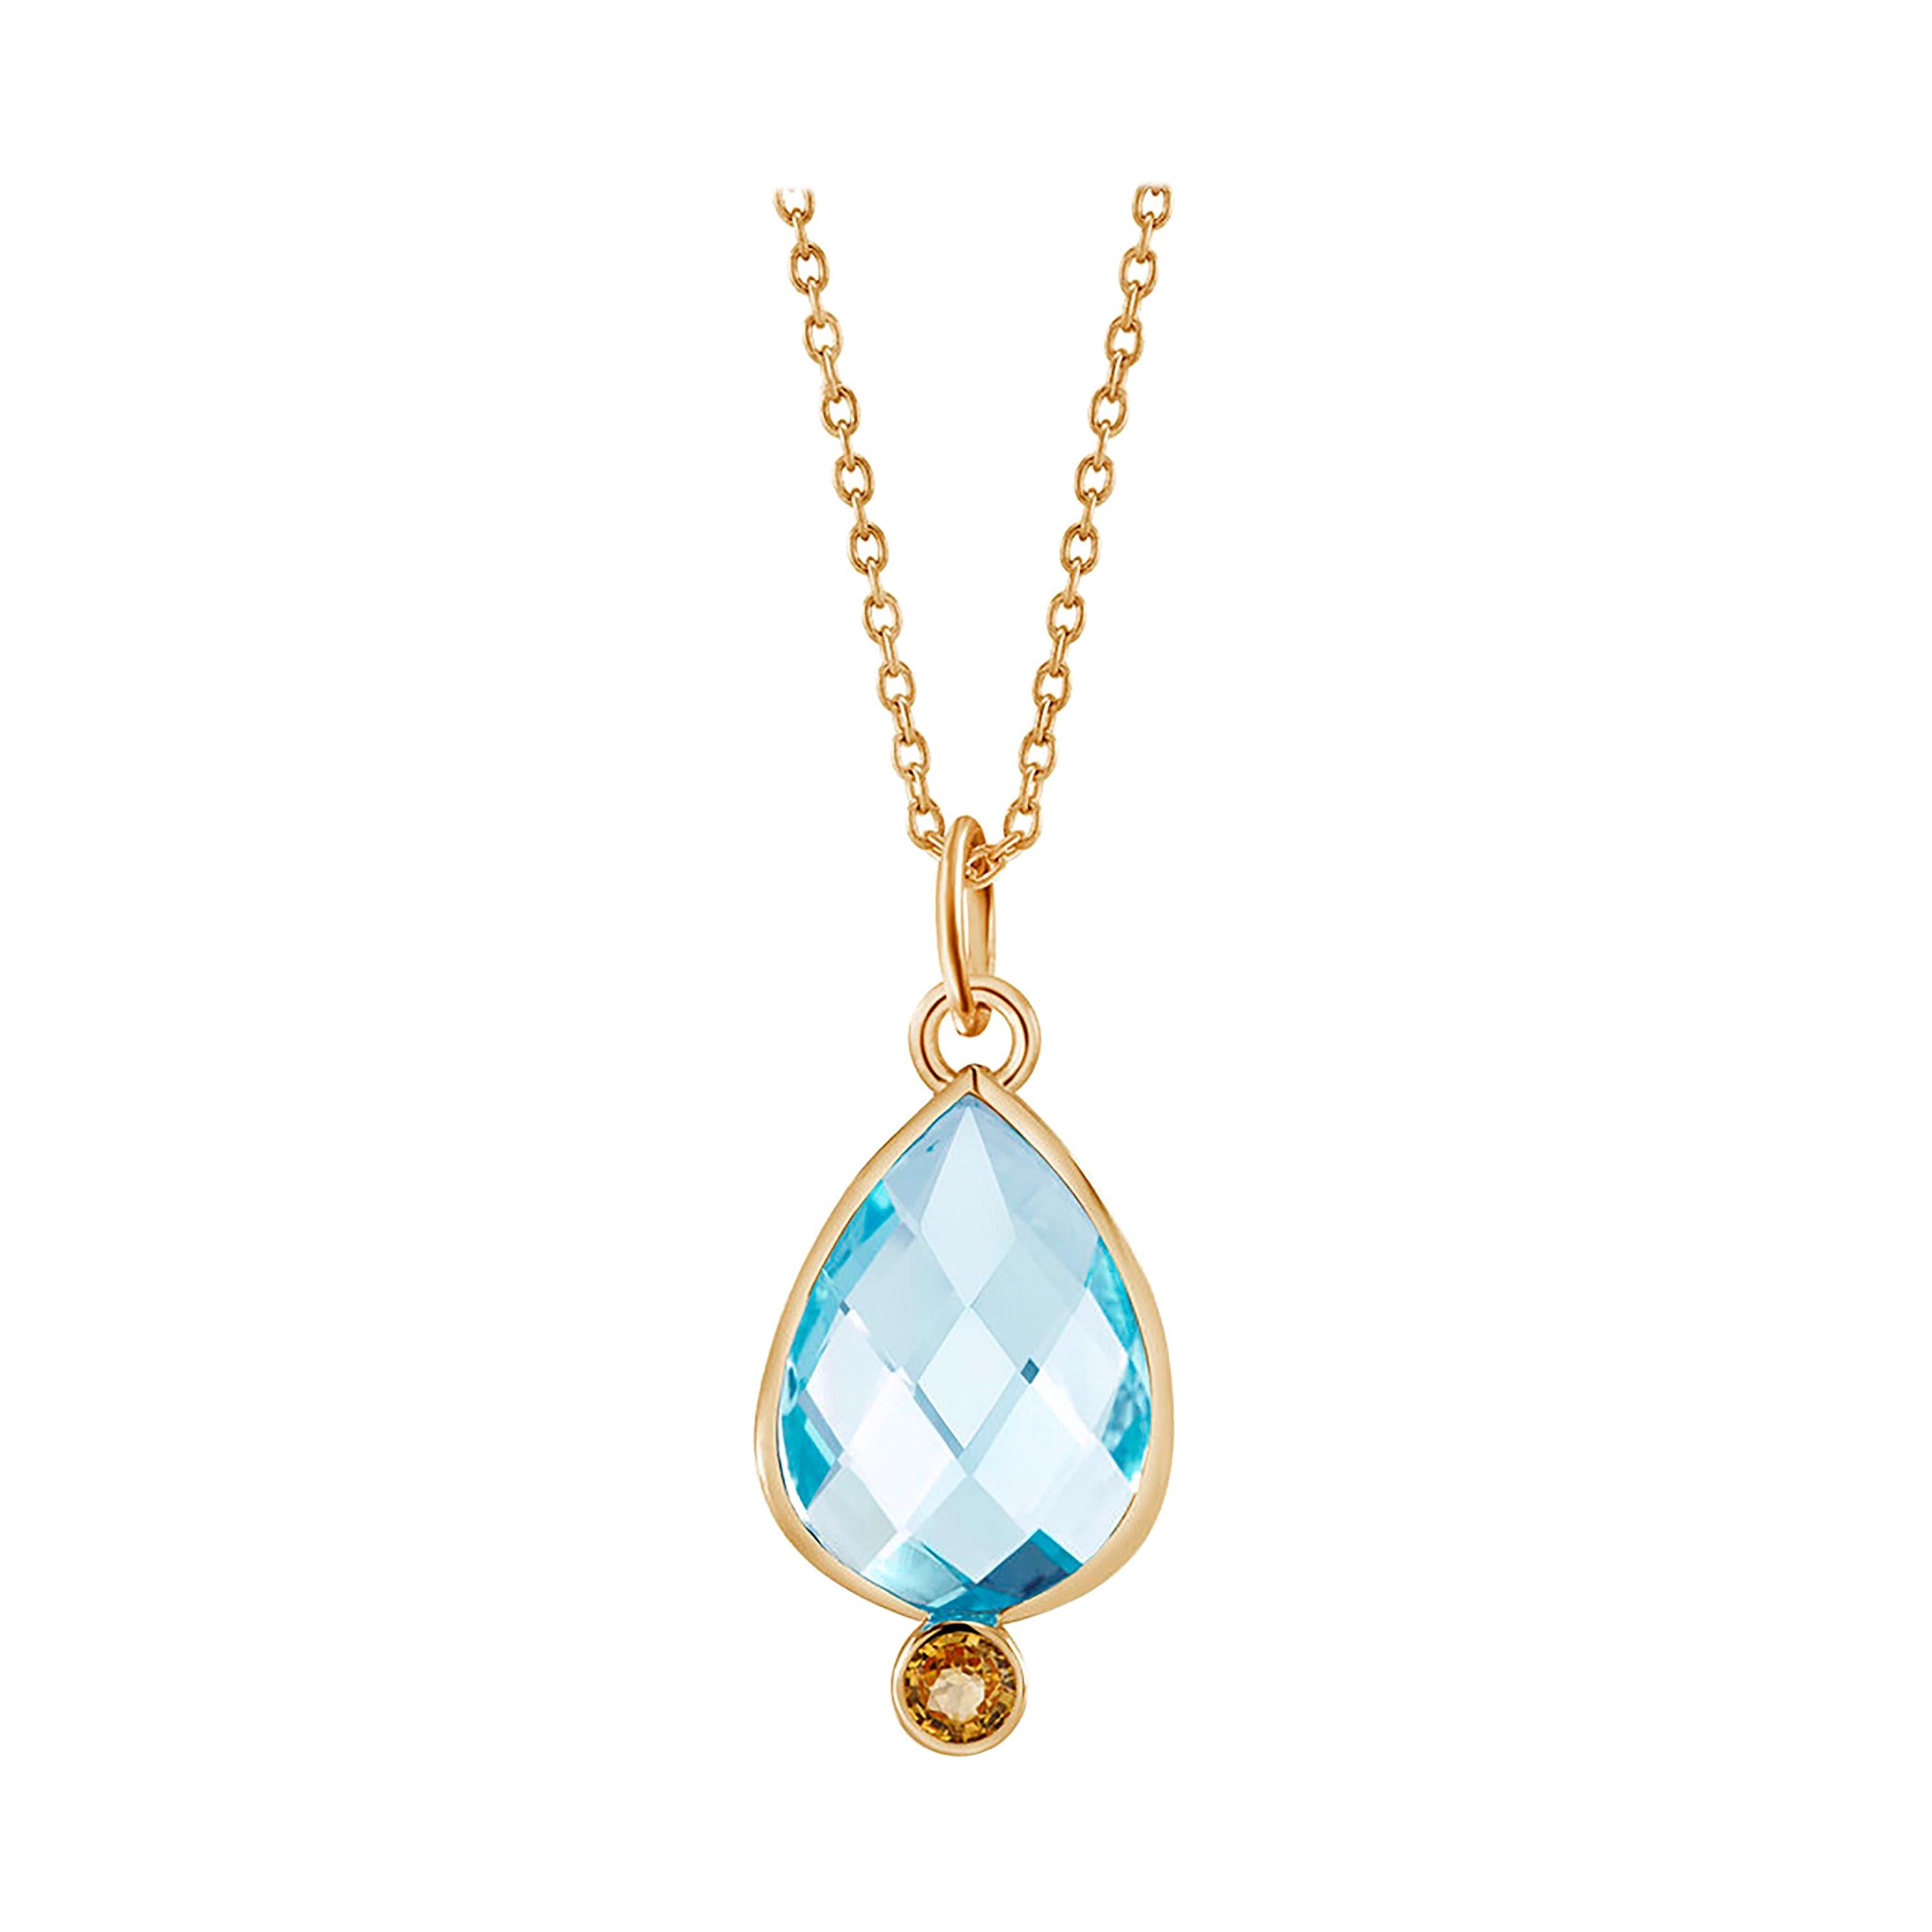 Double Sided Briolette Blue Topaz Silver Pendant Necklace Yellow Gold-Plated